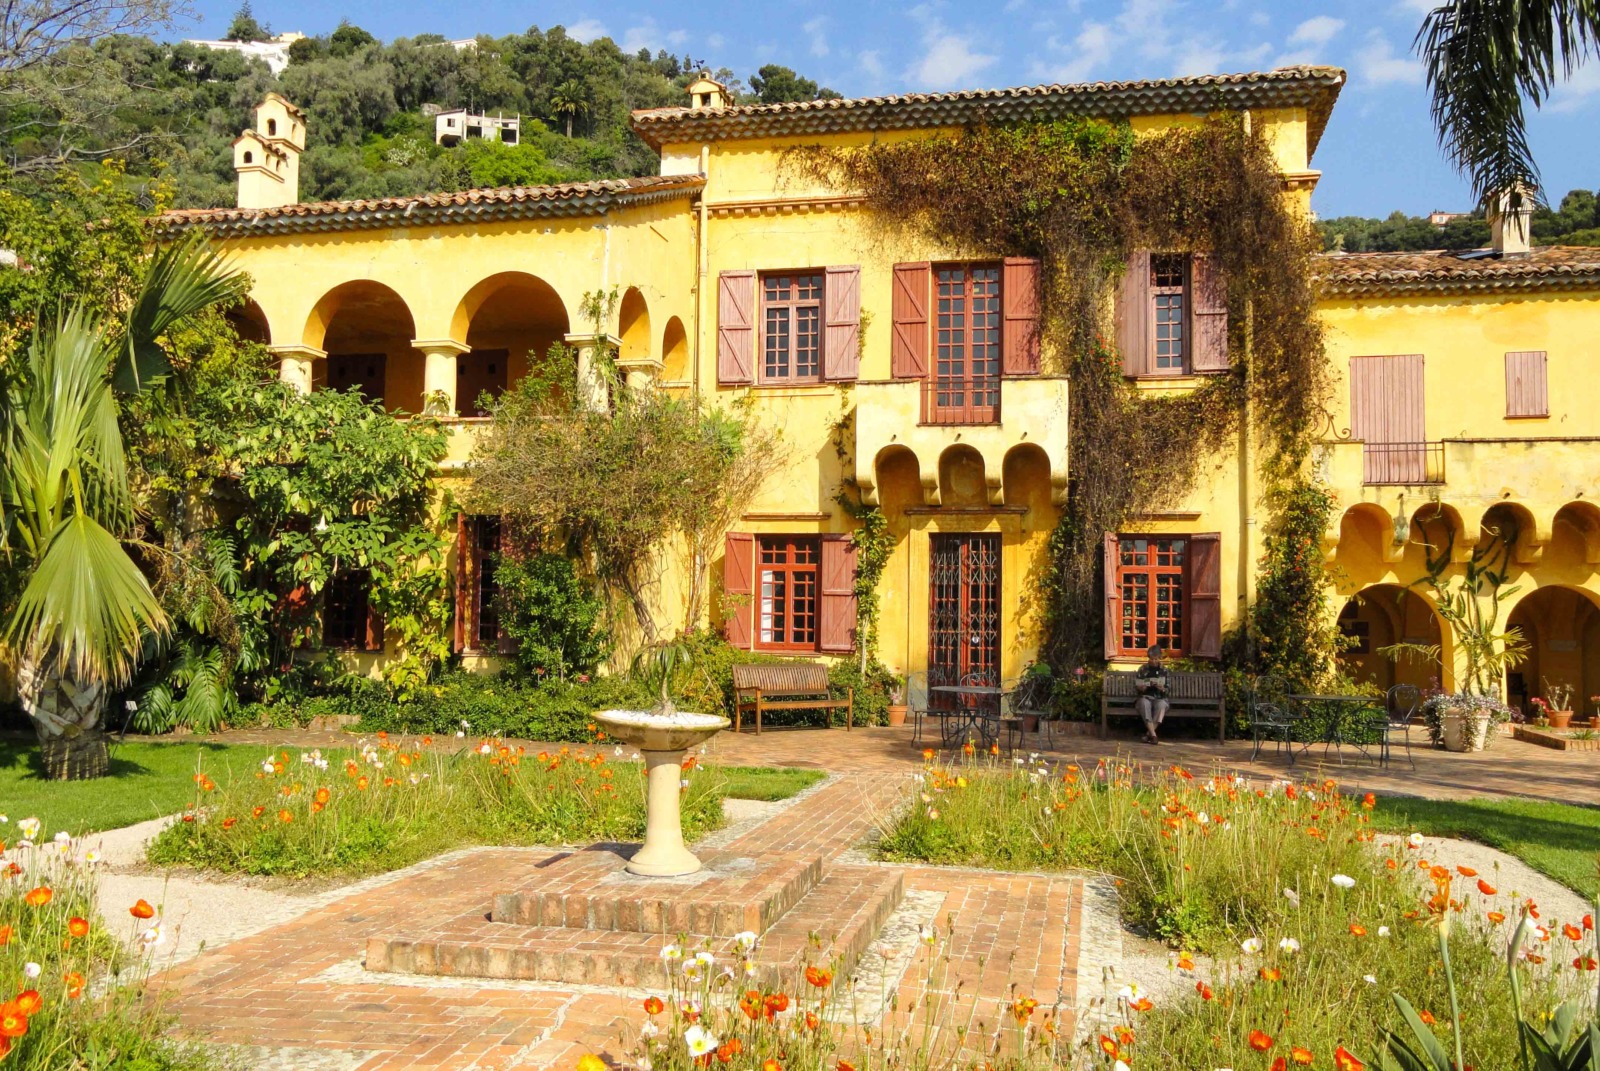 Menton's Parks and Gardens - Val Rahmeh. Photo: Daderot (Public Domain)